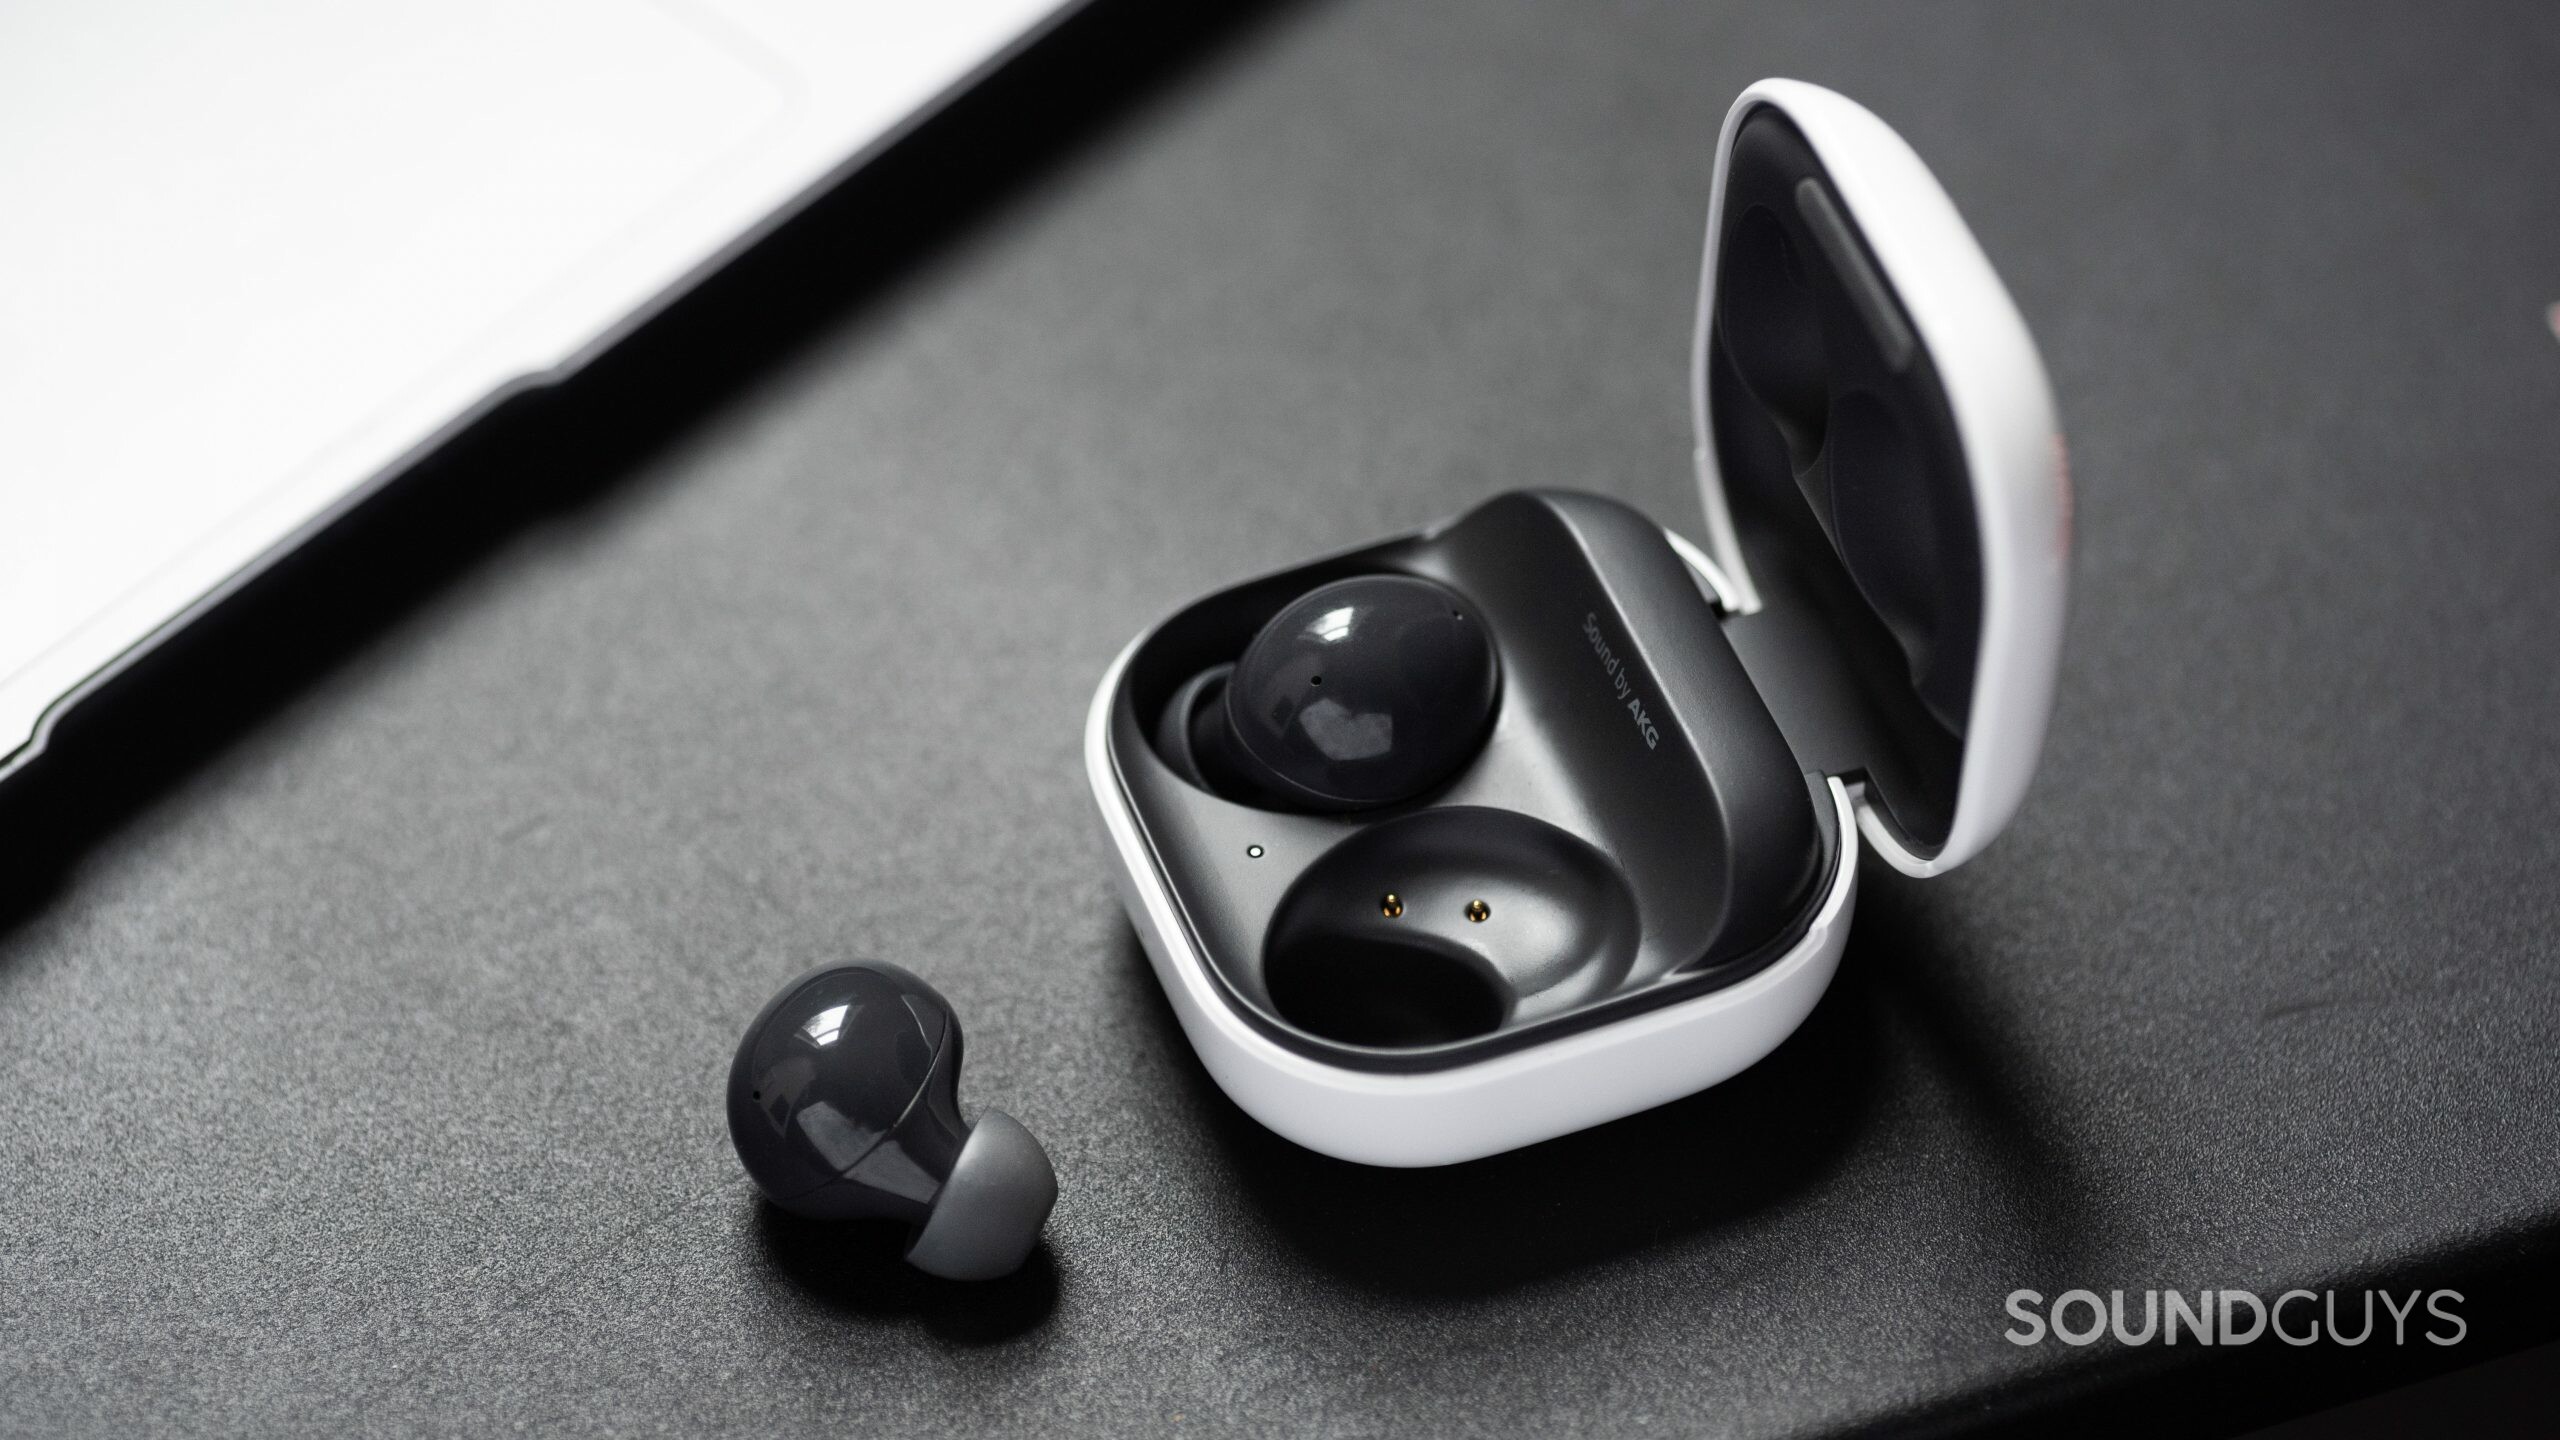 Samsung Galaxy Buds 2 review: Solid earbuds for Android - SoundGuys